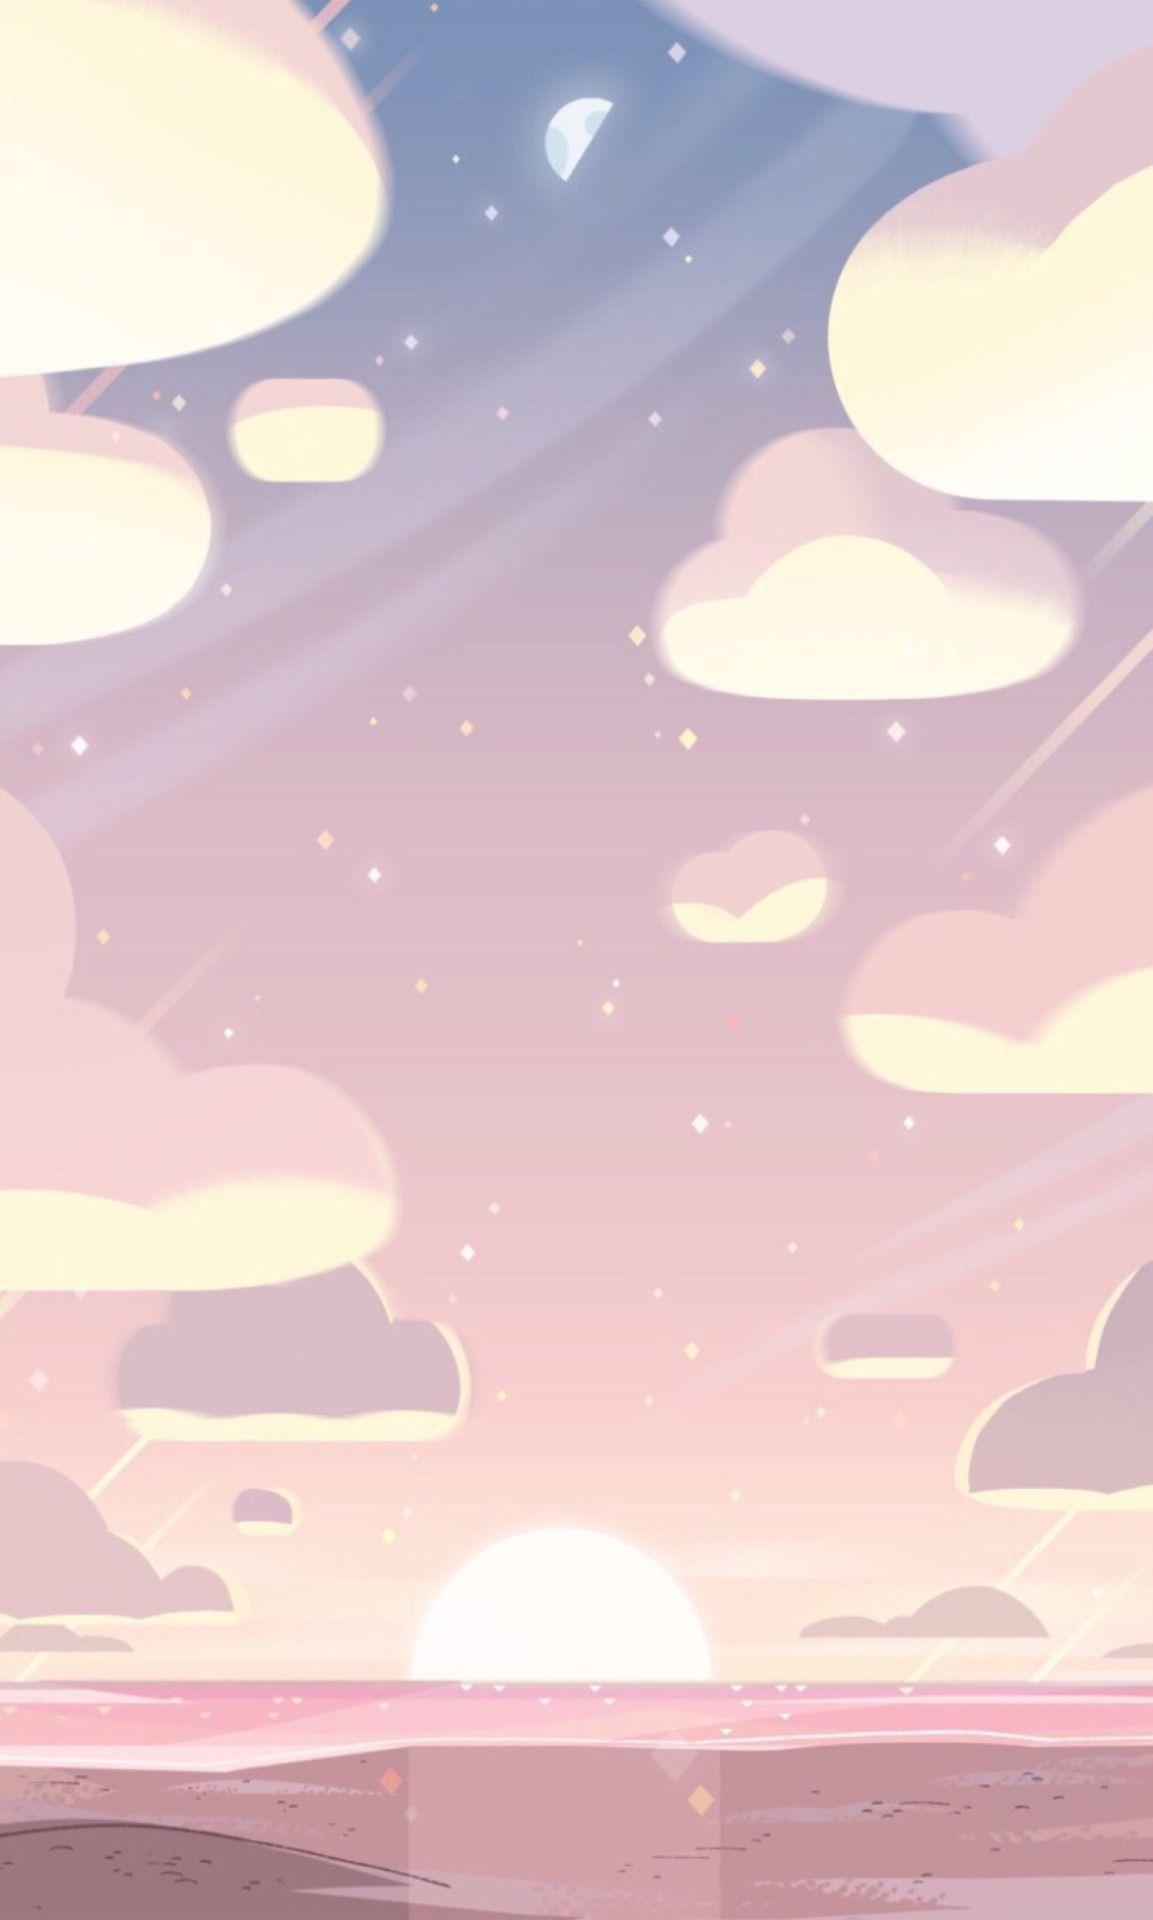 Aesthetic wallpaper iPad showing a cartoon illustration of a sunset with clouds and a star